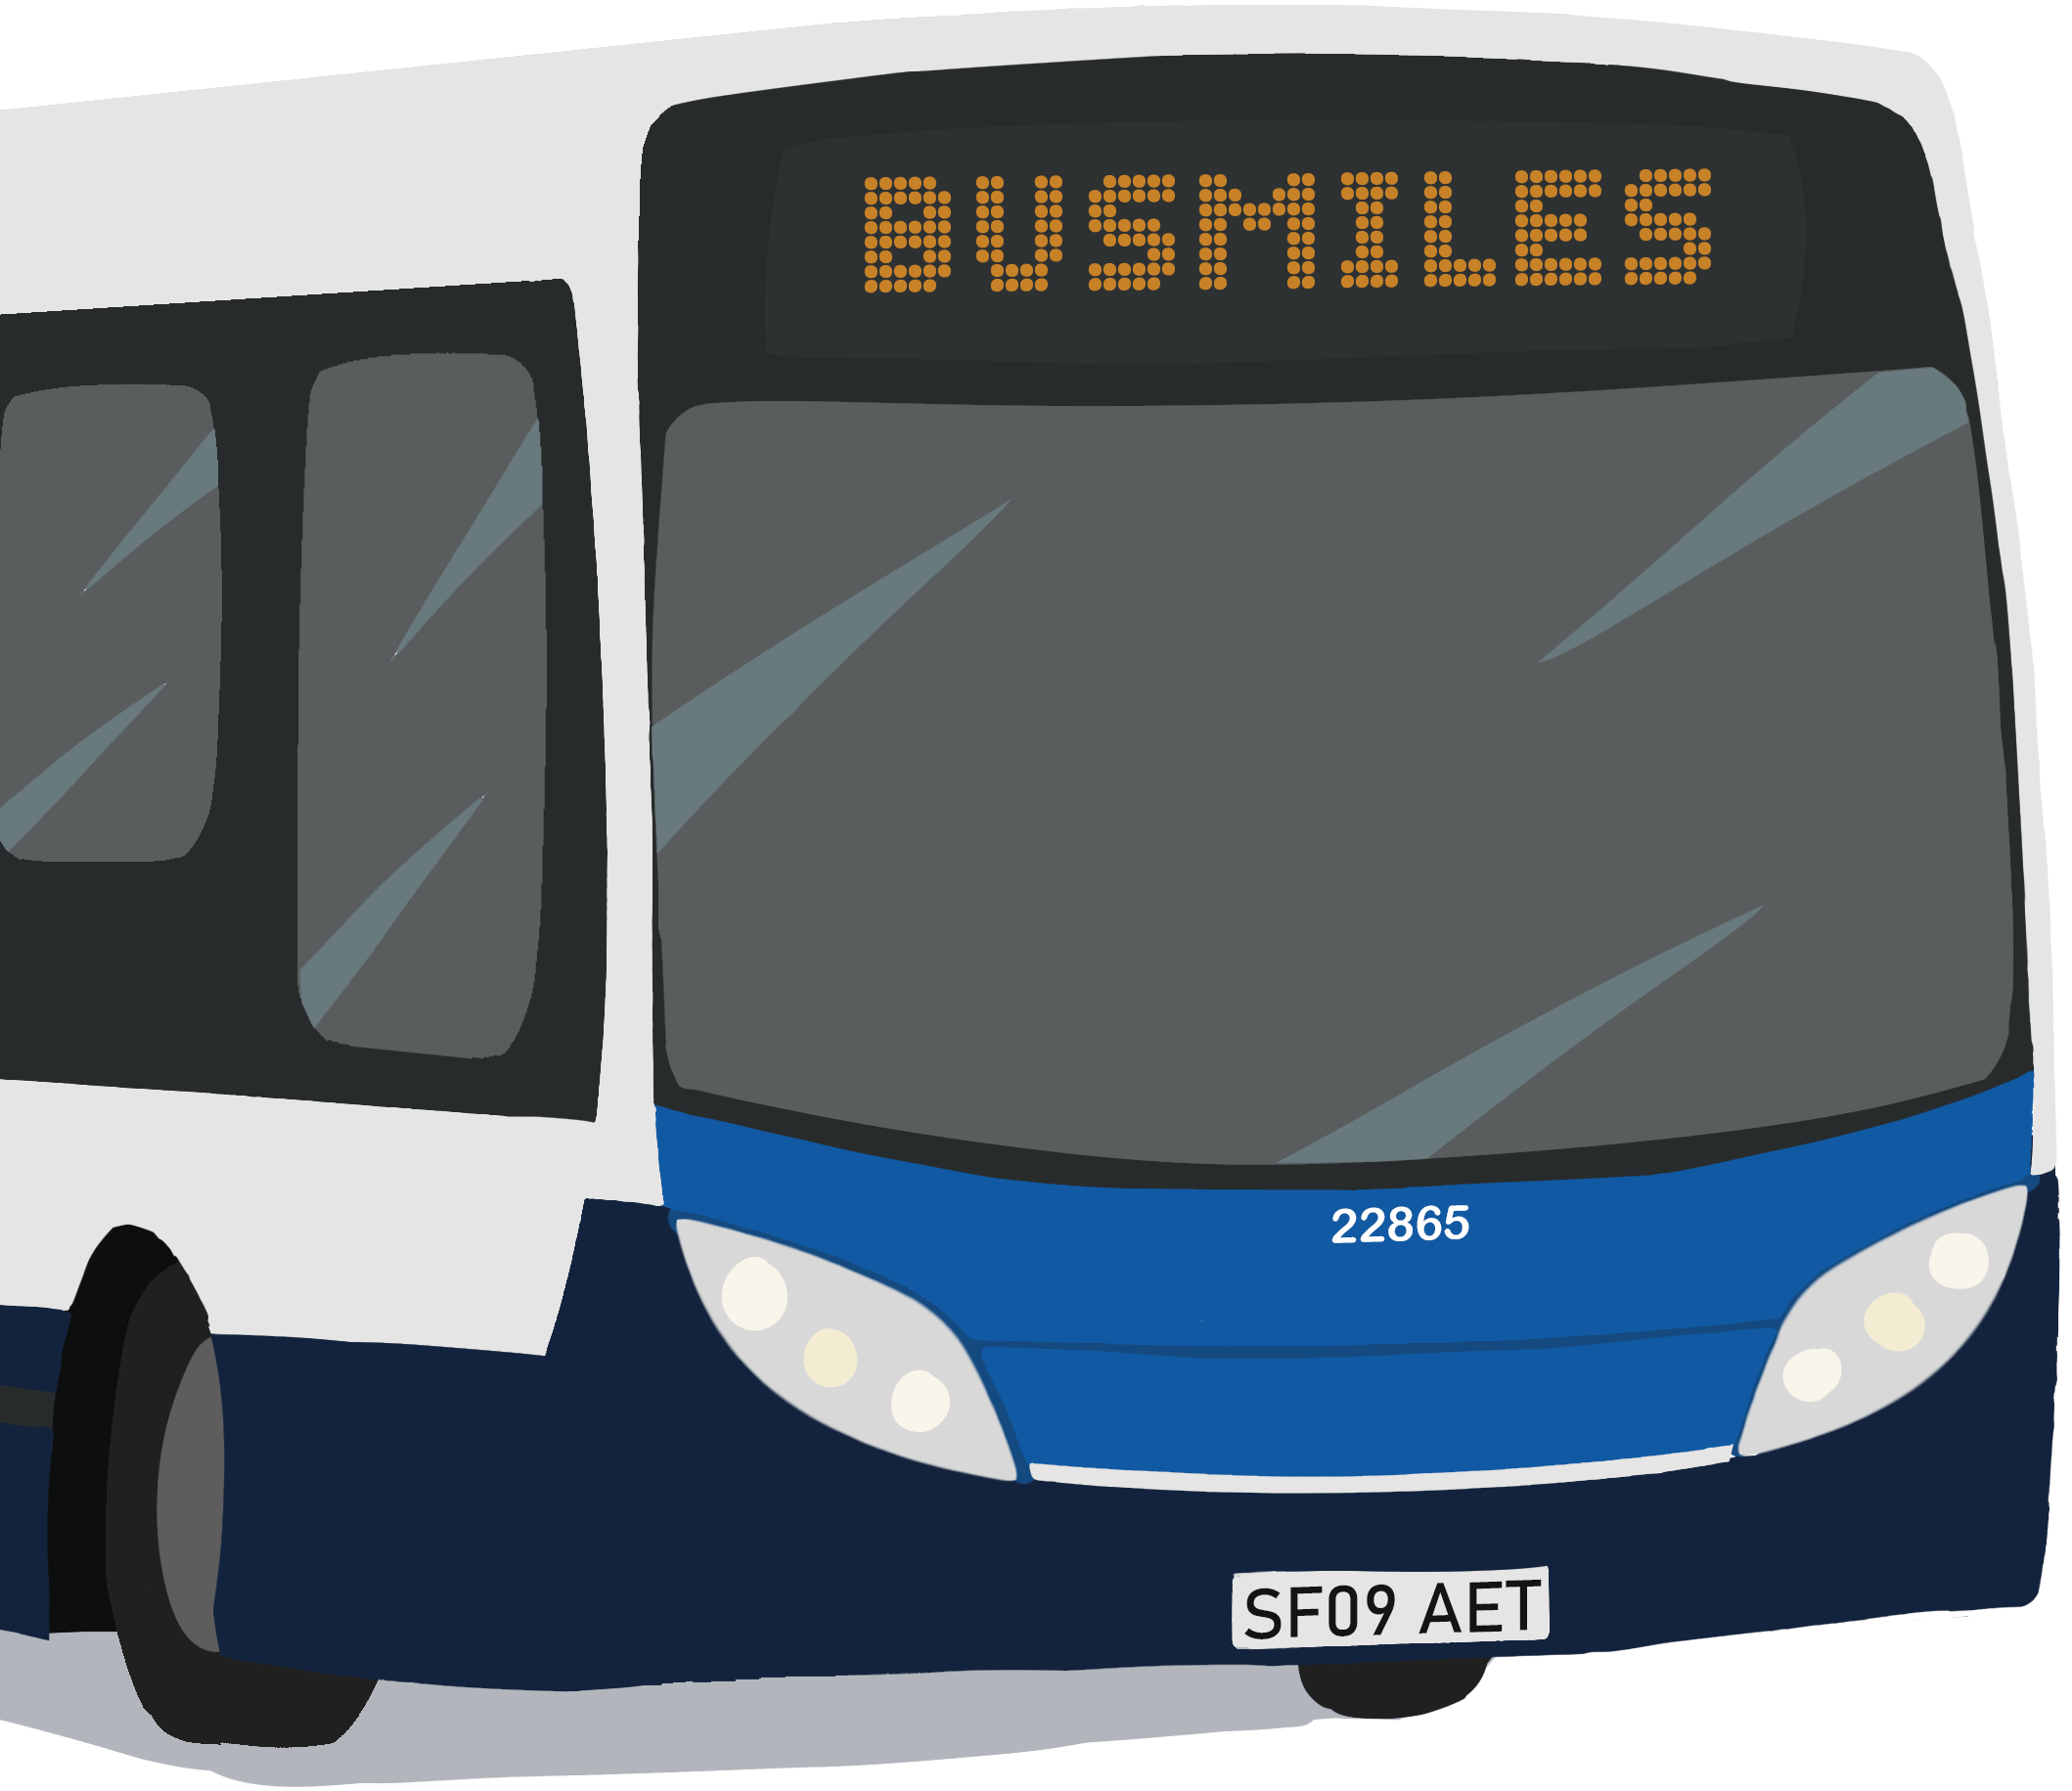 Busmiles - The Bus Mileage System